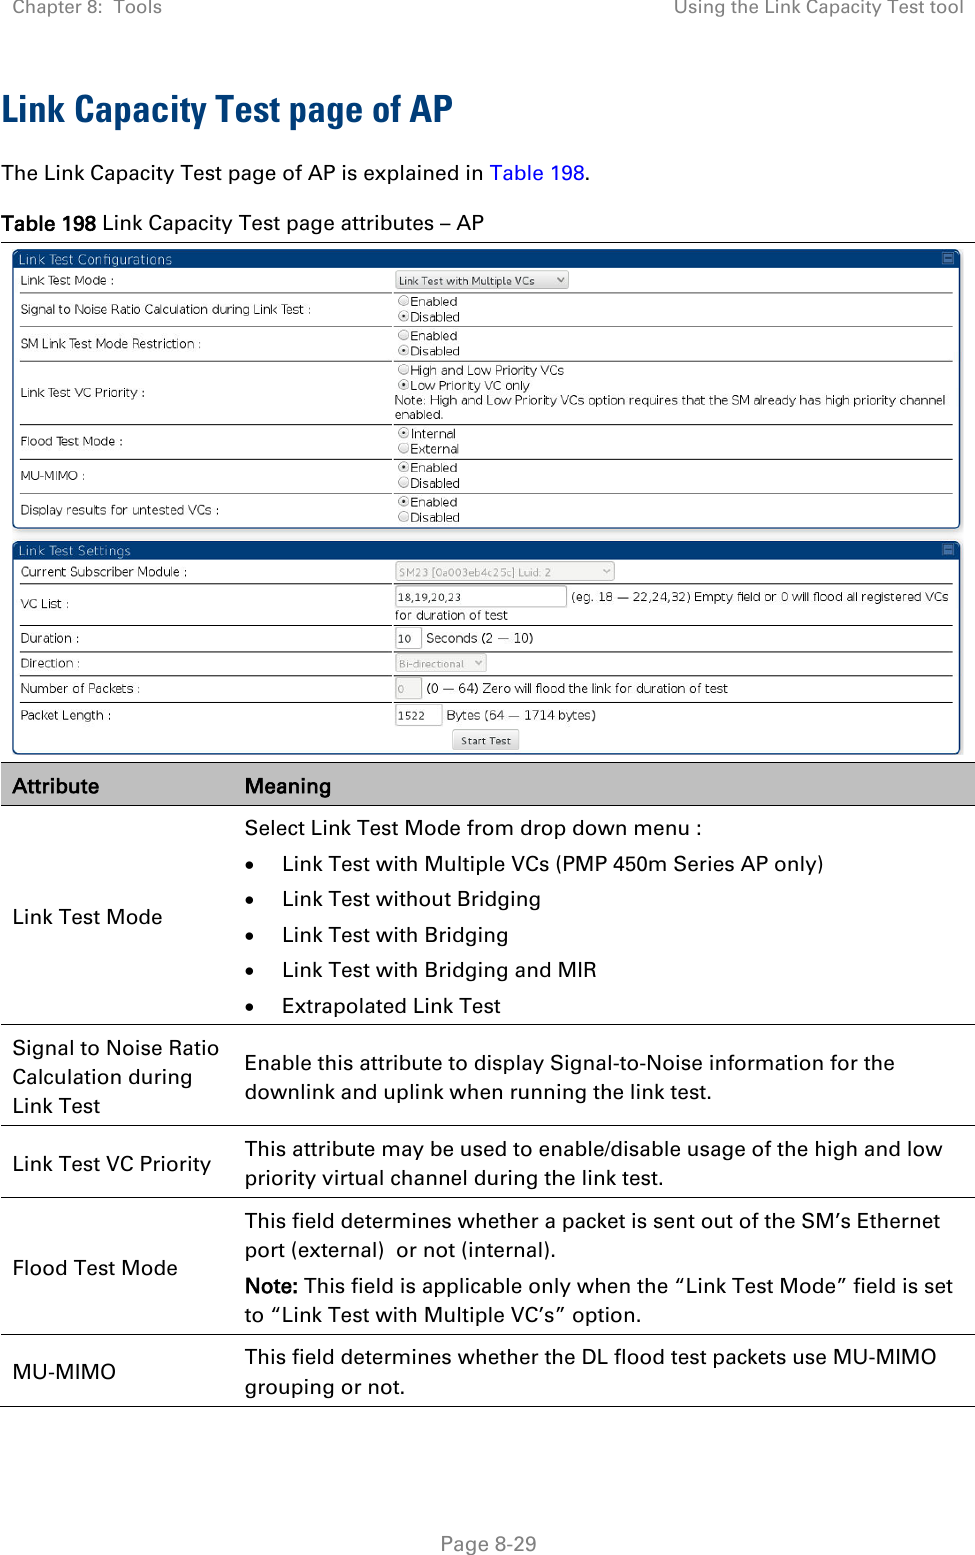 Chapter 8:  Tools Using the Link Capacity Test tool   Page 8-29 Link Capacity Test page of AP The Link Capacity Test page of AP is explained in Table 198. Table 198 Link Capacity Test page attributes – AP  Attribute Meaning Link Test Mode Select Link Test Mode from drop down menu : • Link Test with Multiple VCs (PMP 450m Series AP only) • Link Test without Bridging • Link Test with Bridging • Link Test with Bridging and MIR  • Extrapolated Link Test Signal to Noise Ratio Calculation during Link Test Enable this attribute to display Signal-to-Noise information for the downlink and uplink when running the link test.  Link Test VC Priority This attribute may be used to enable/disable usage of the high and low priority virtual channel during the link test. Flood Test Mode This field determines whether a packet is sent out of the SM’s Ethernet port (external)  or not (internal).   Note: This field is applicable only when the “Link Test Mode” field is set to “Link Test with Multiple VC’s” option. MU-MIMO This field determines whether the DL flood test packets use MU-MIMO grouping or not. 